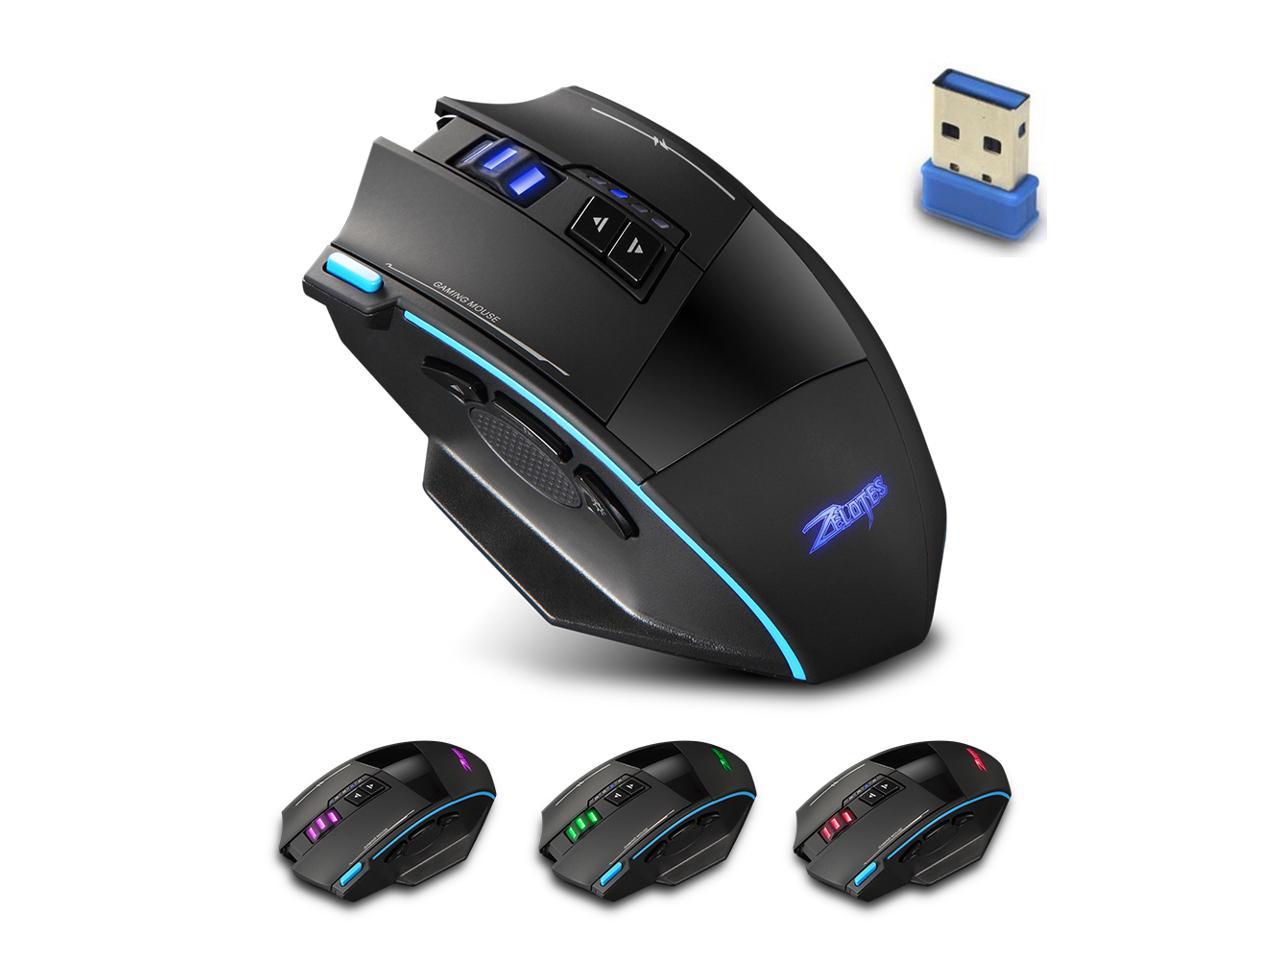 Adjustable 2.4GHz 2400 DPI Wireless Gaming Mouse Mice For Computer PC Laptop 